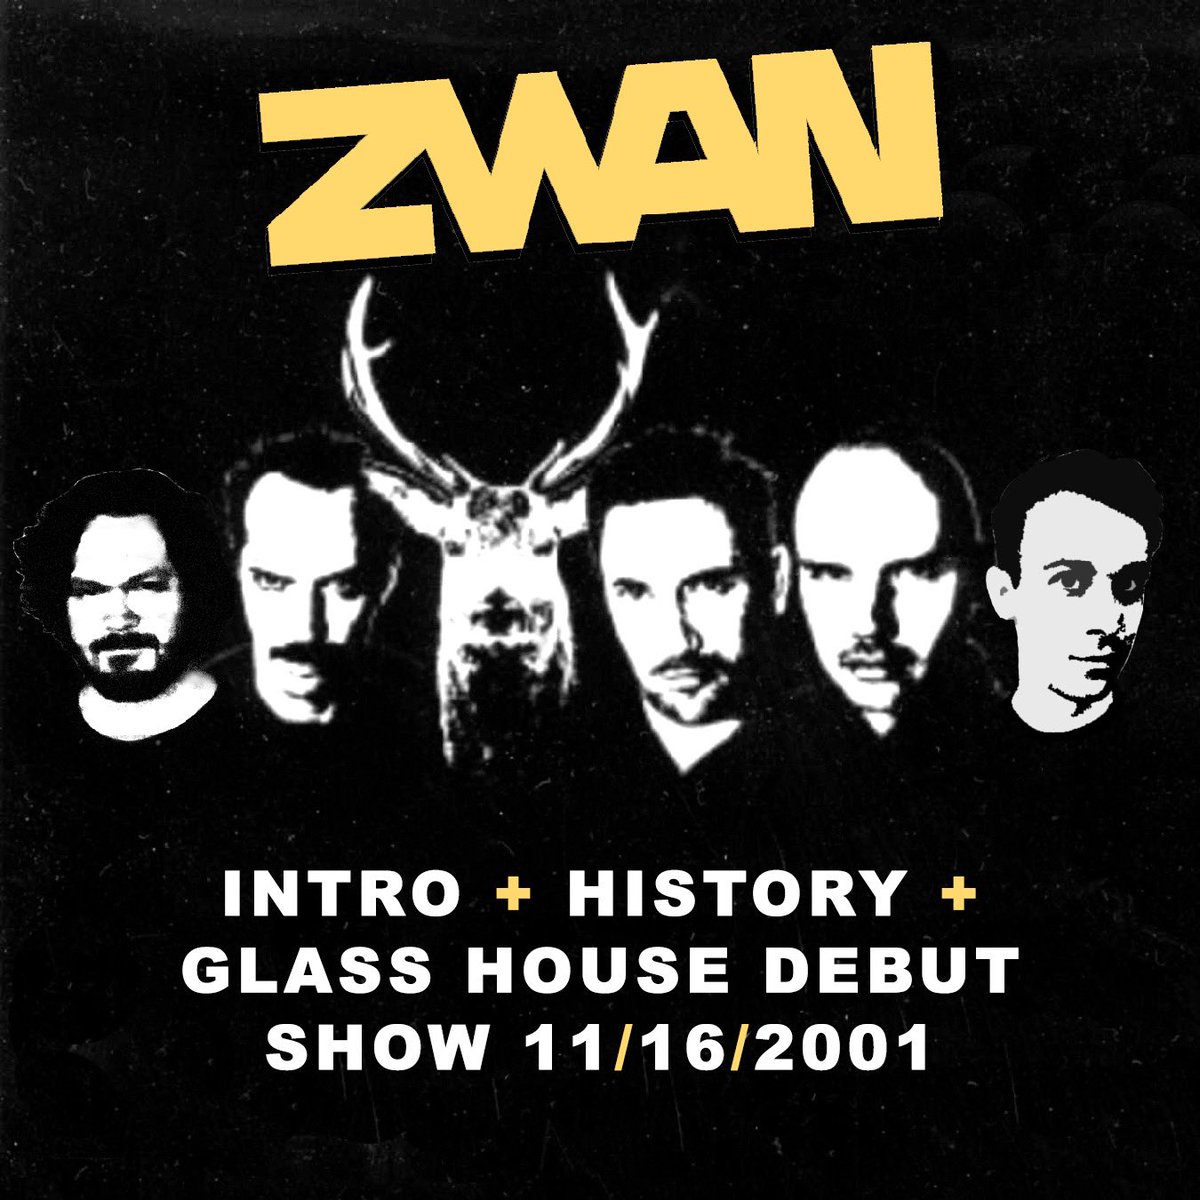 OUT NOW!
Zeason's Greetings! We're kicking off Zwan Zeason with a lil' introduction to the band and its history, and then cover their 'first official, ticketed show,' which took place at The Glass House! #zwan #billycorgan #jimmychamberlin #mattsweeney #davidpajo #pazlenchantin